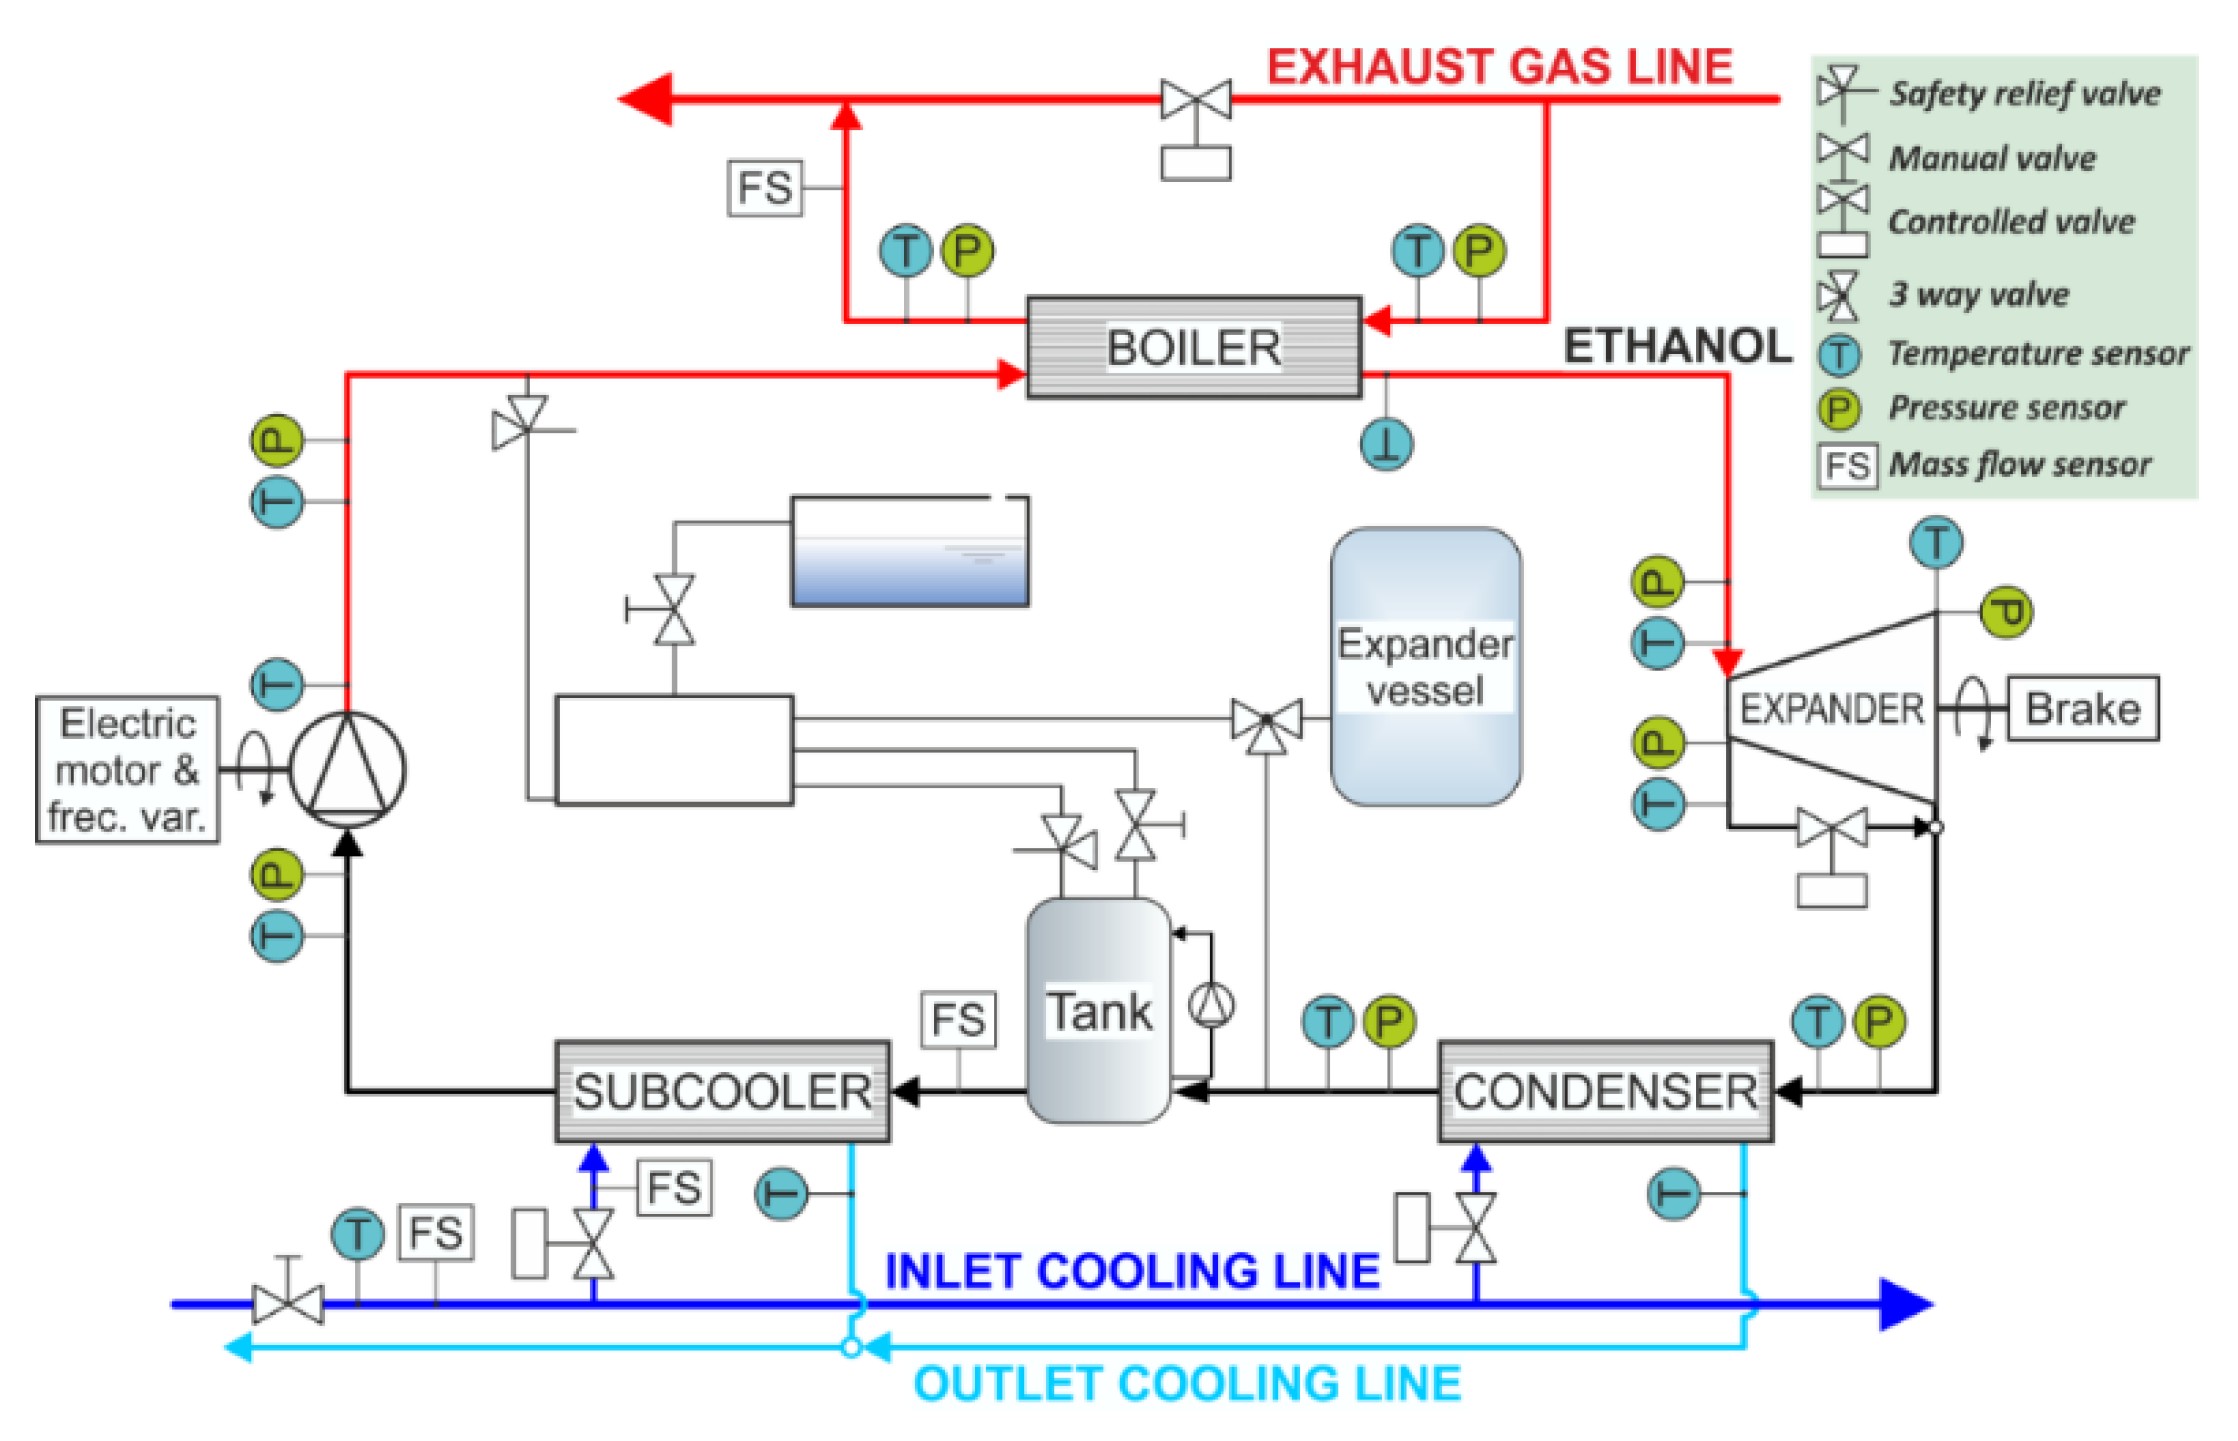 Combustion Engine Diagram Energies Free Full Text Of Combustion Engine Diagram